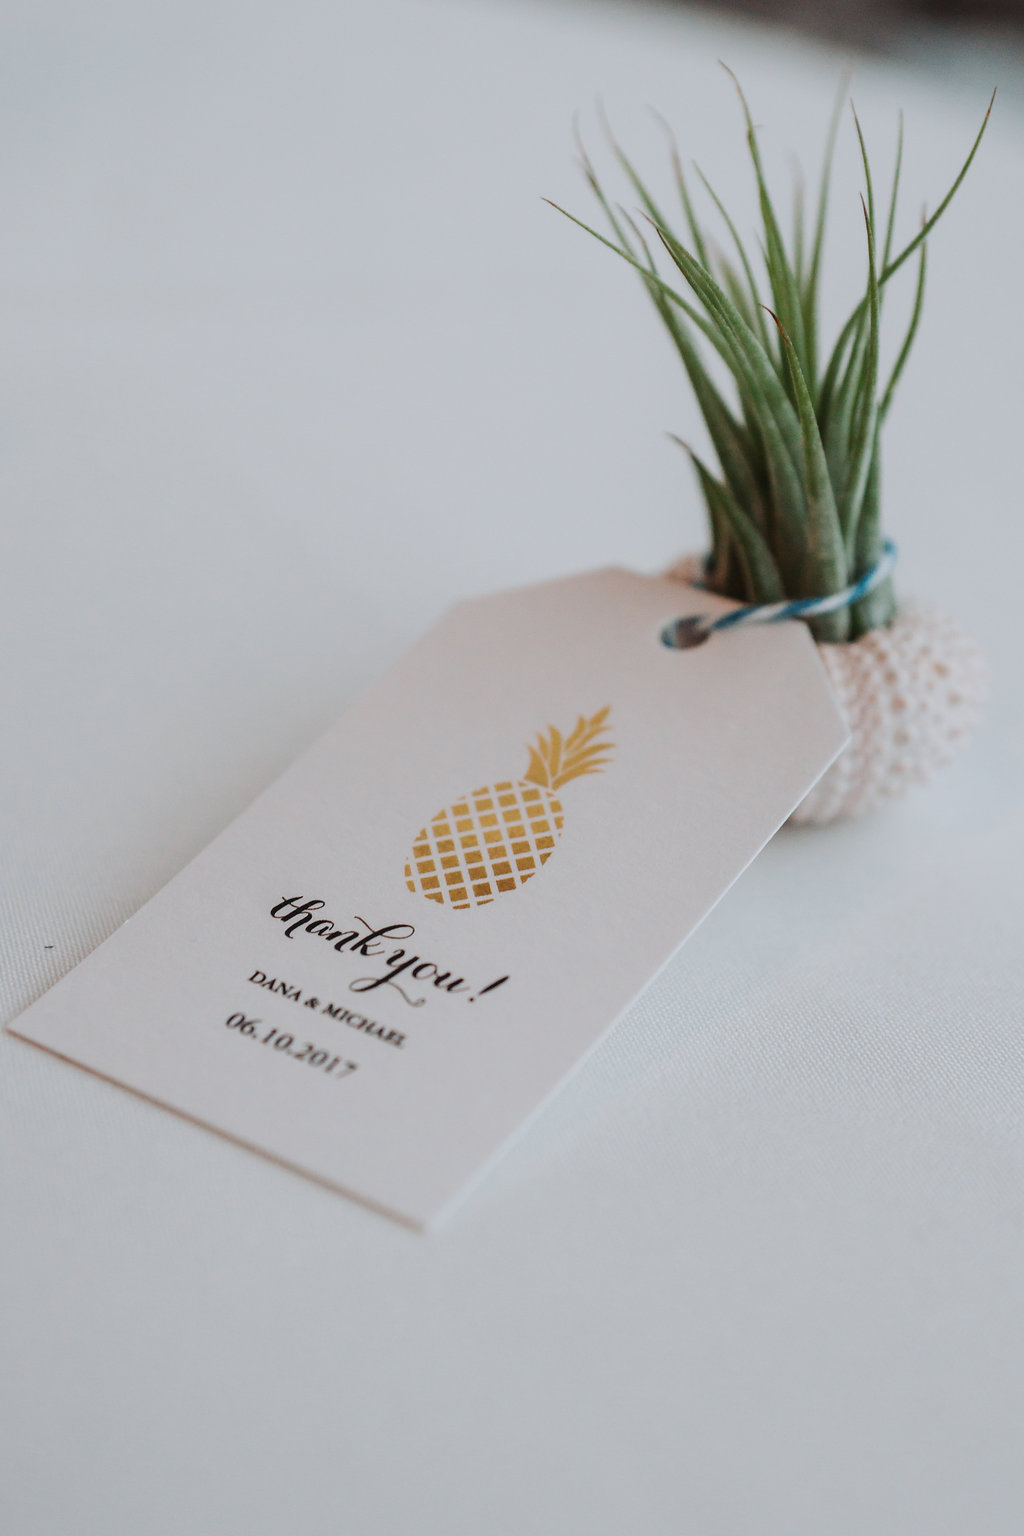 Succulent in White Porcelain Pot with Printed Gold Pineapple and Black Text Luggage Tag Wedding Favor